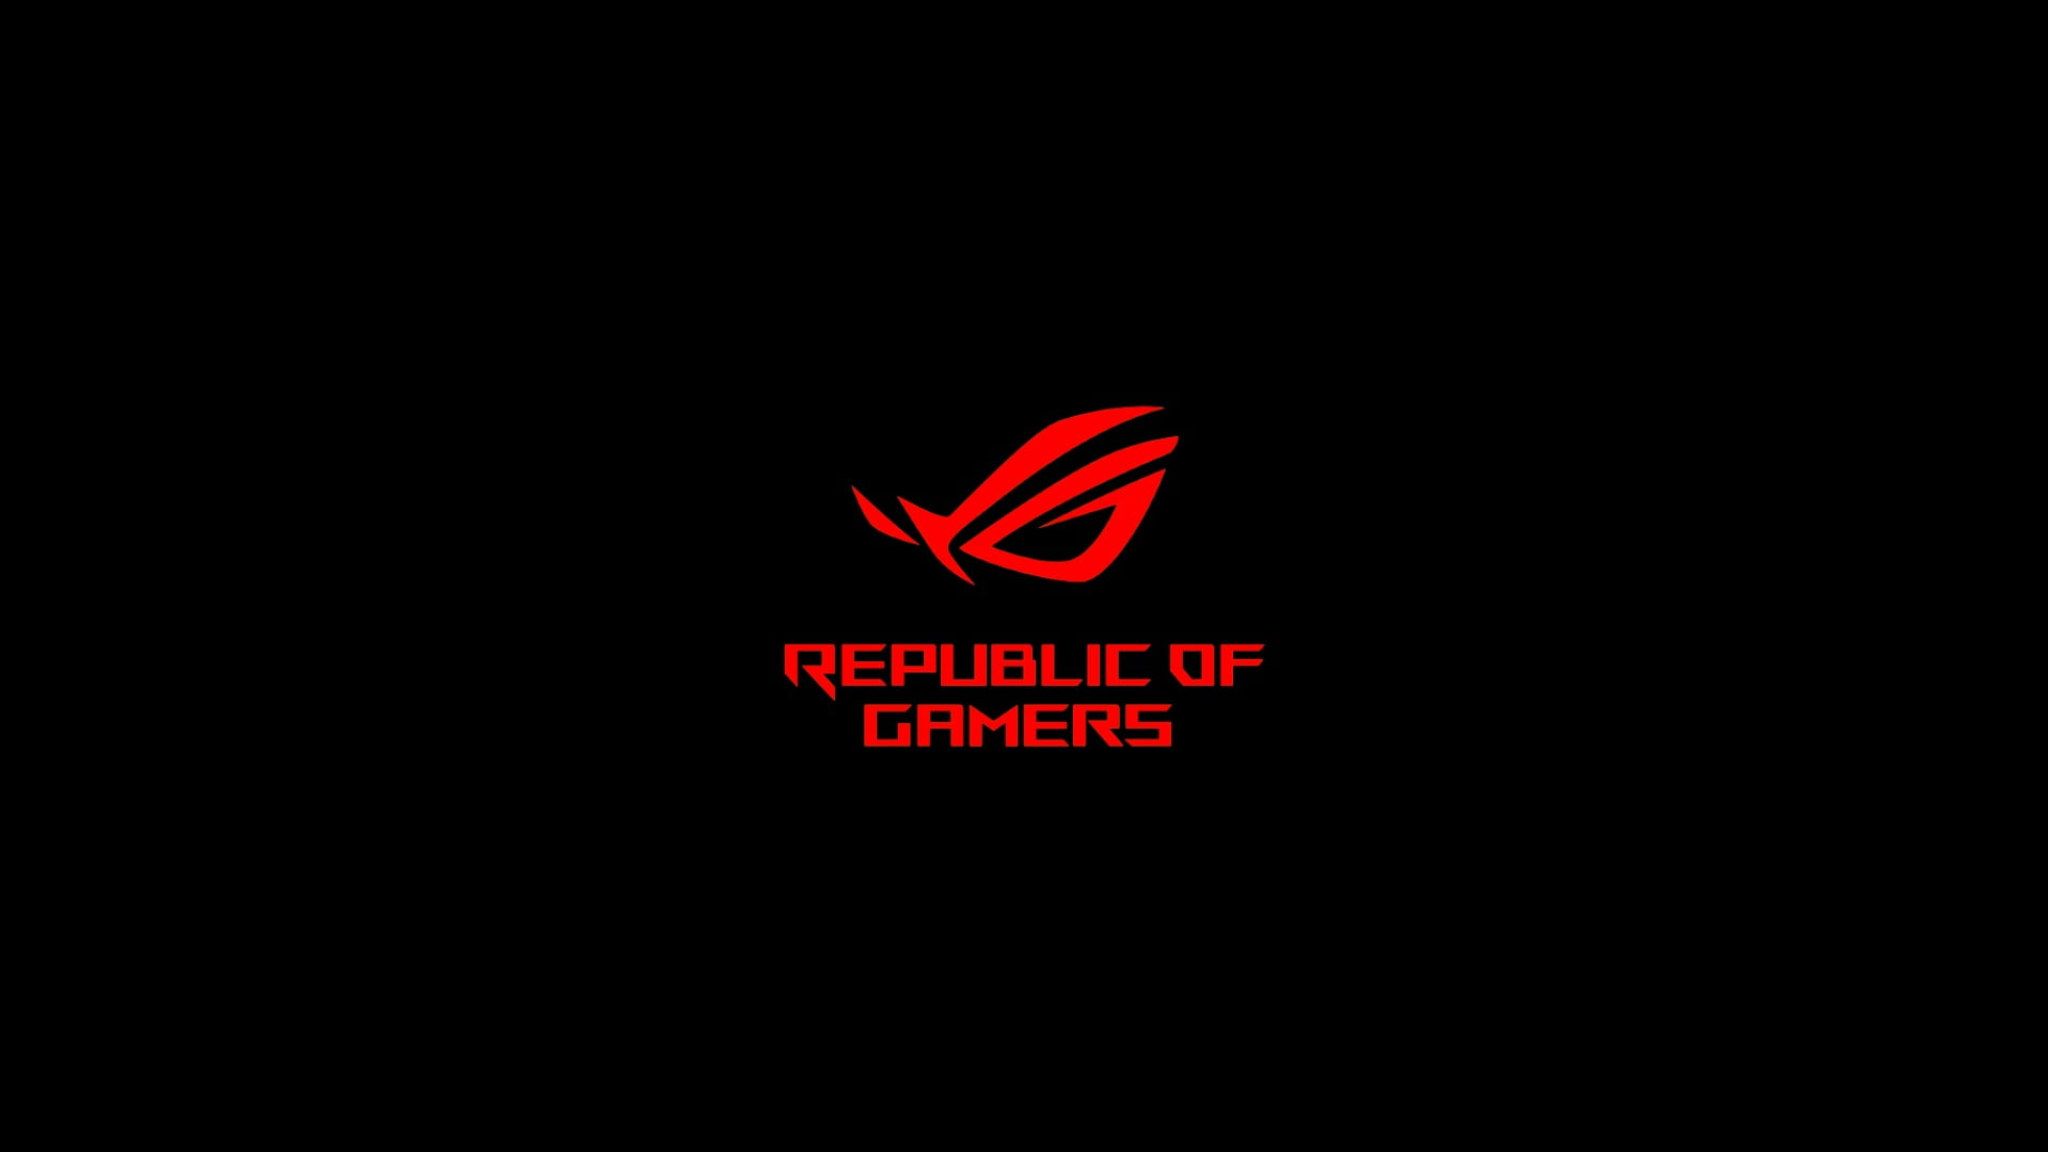 ASUS, Republic of Gamers, red, communication, illuminated, black background • Wallpaper For You HD Wallpaper For Desktop & Mobile